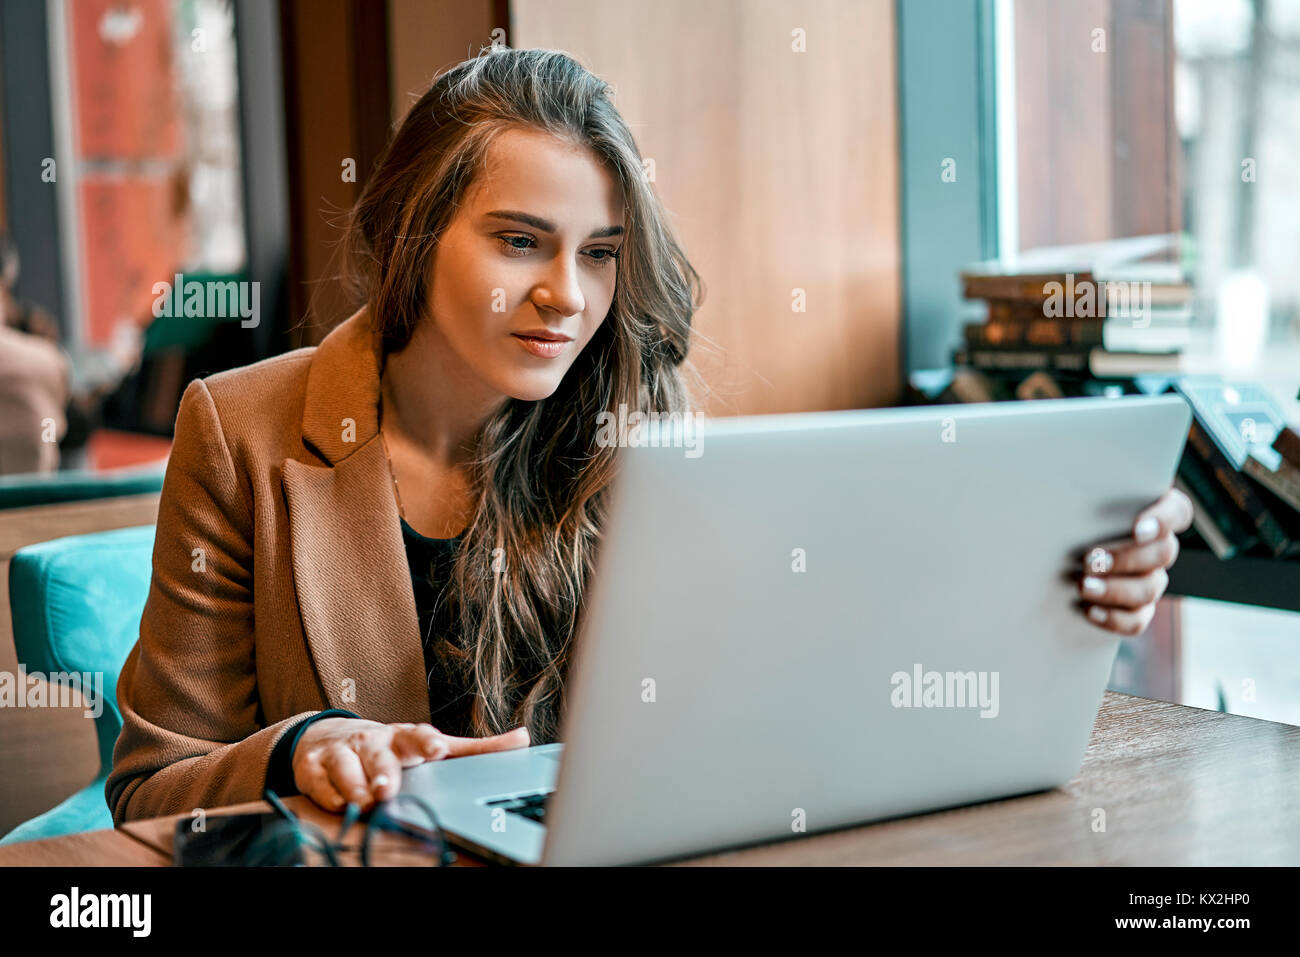 girl working with laptop in cafe Stock Photo